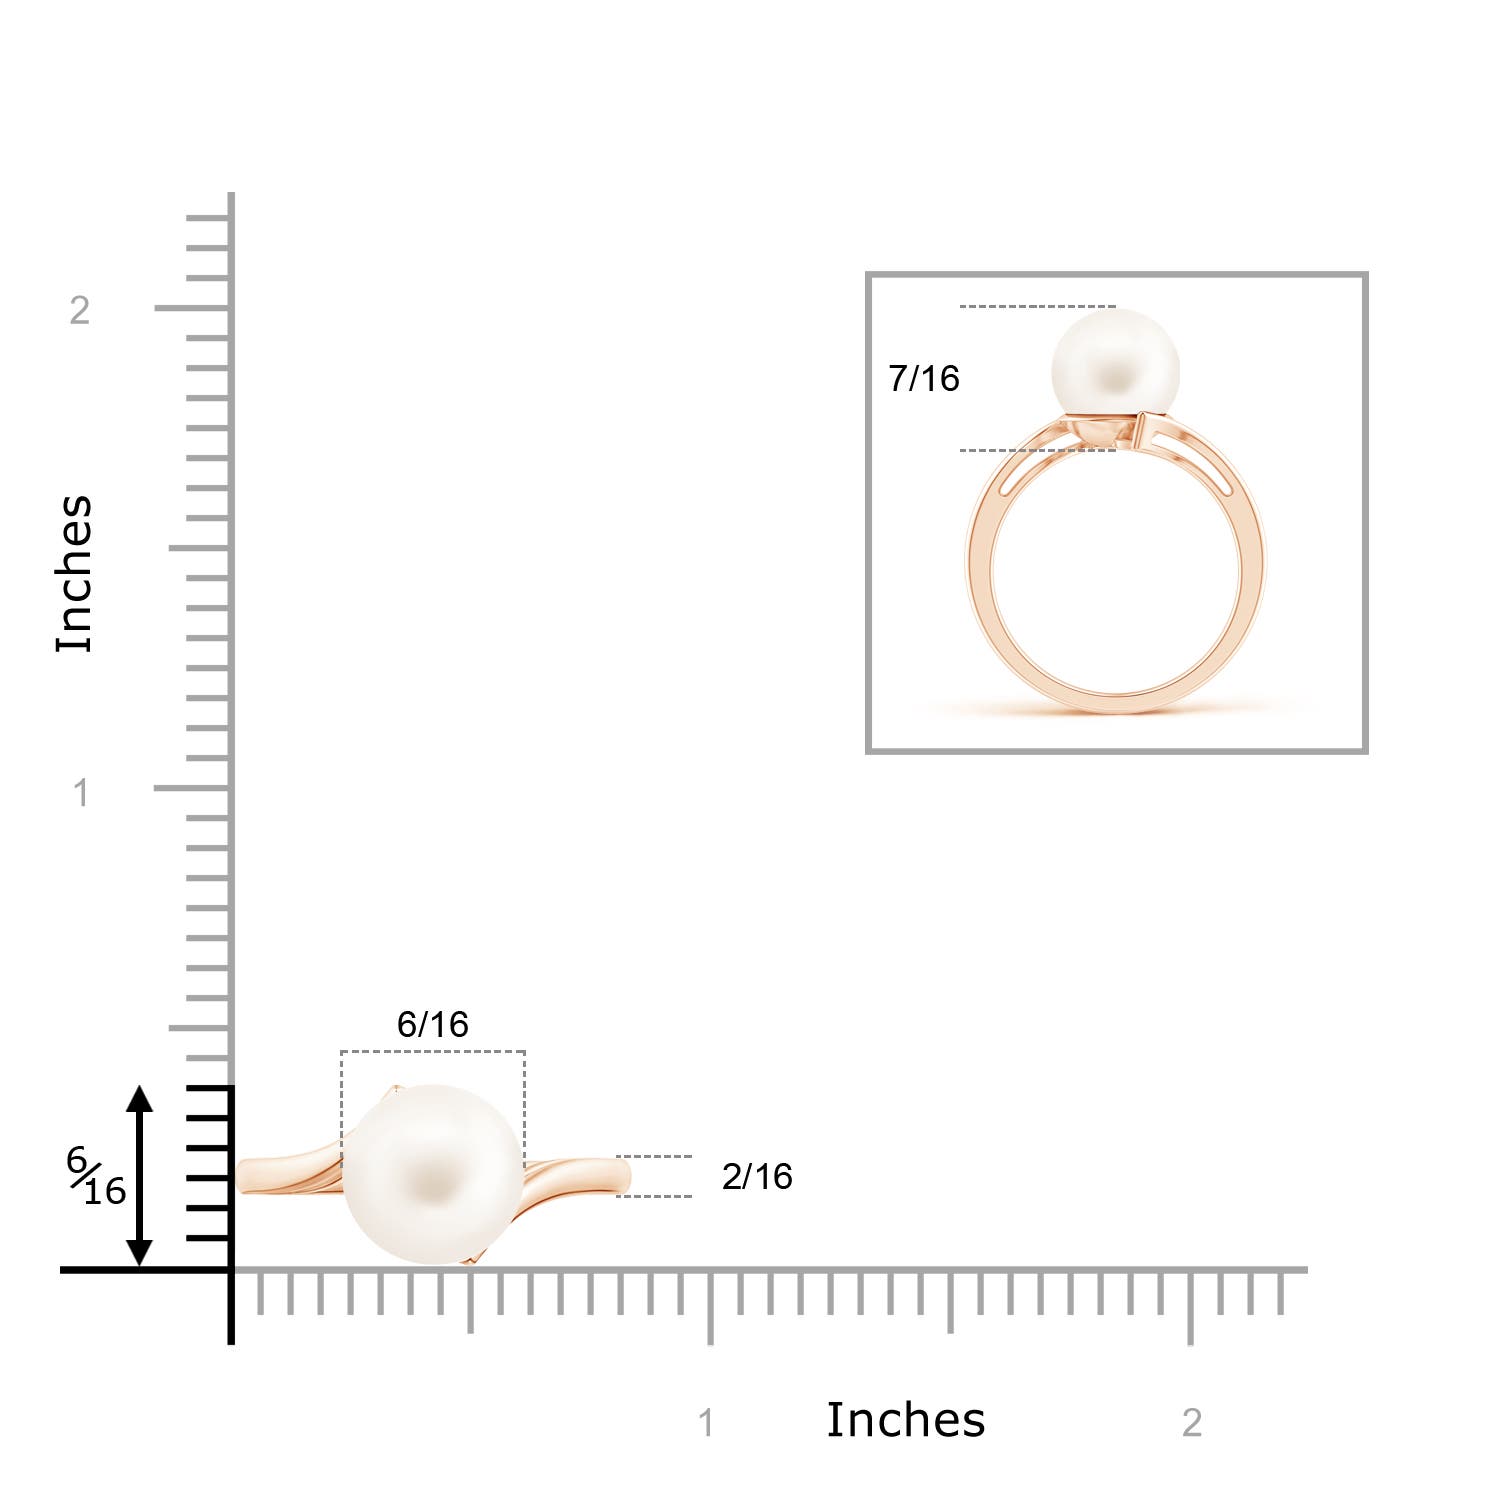 AA / 7.2 CT / 14 KT Rose Gold